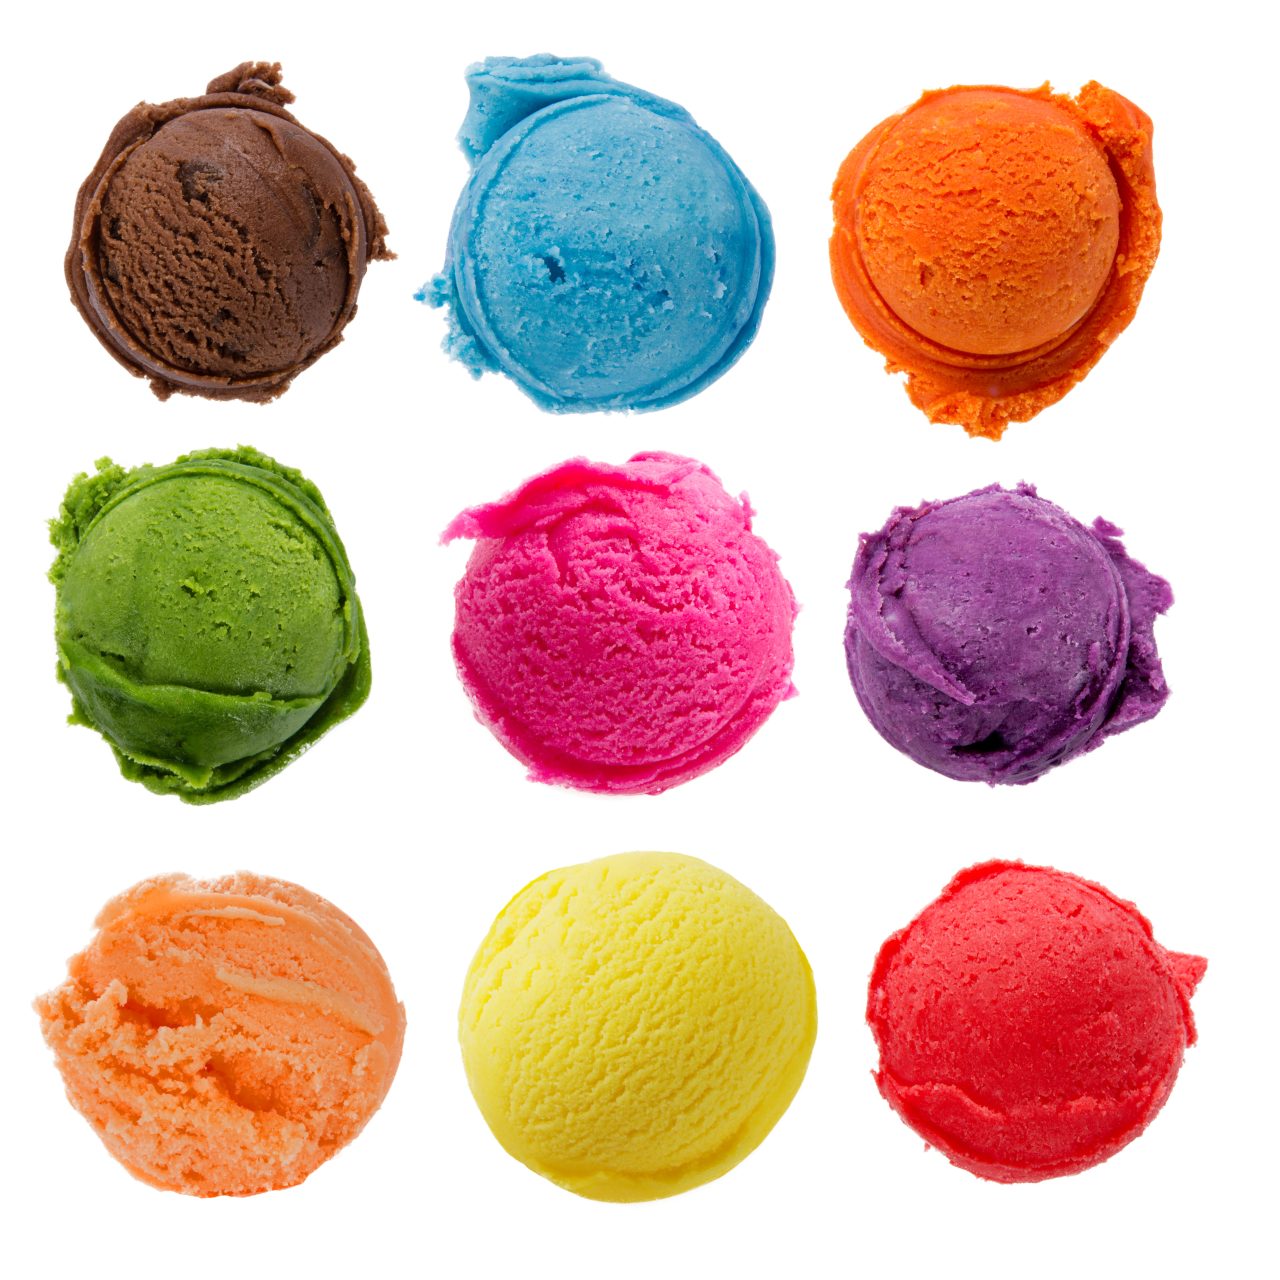 Ice,Cream,Scoops,Collection,On,White,Background